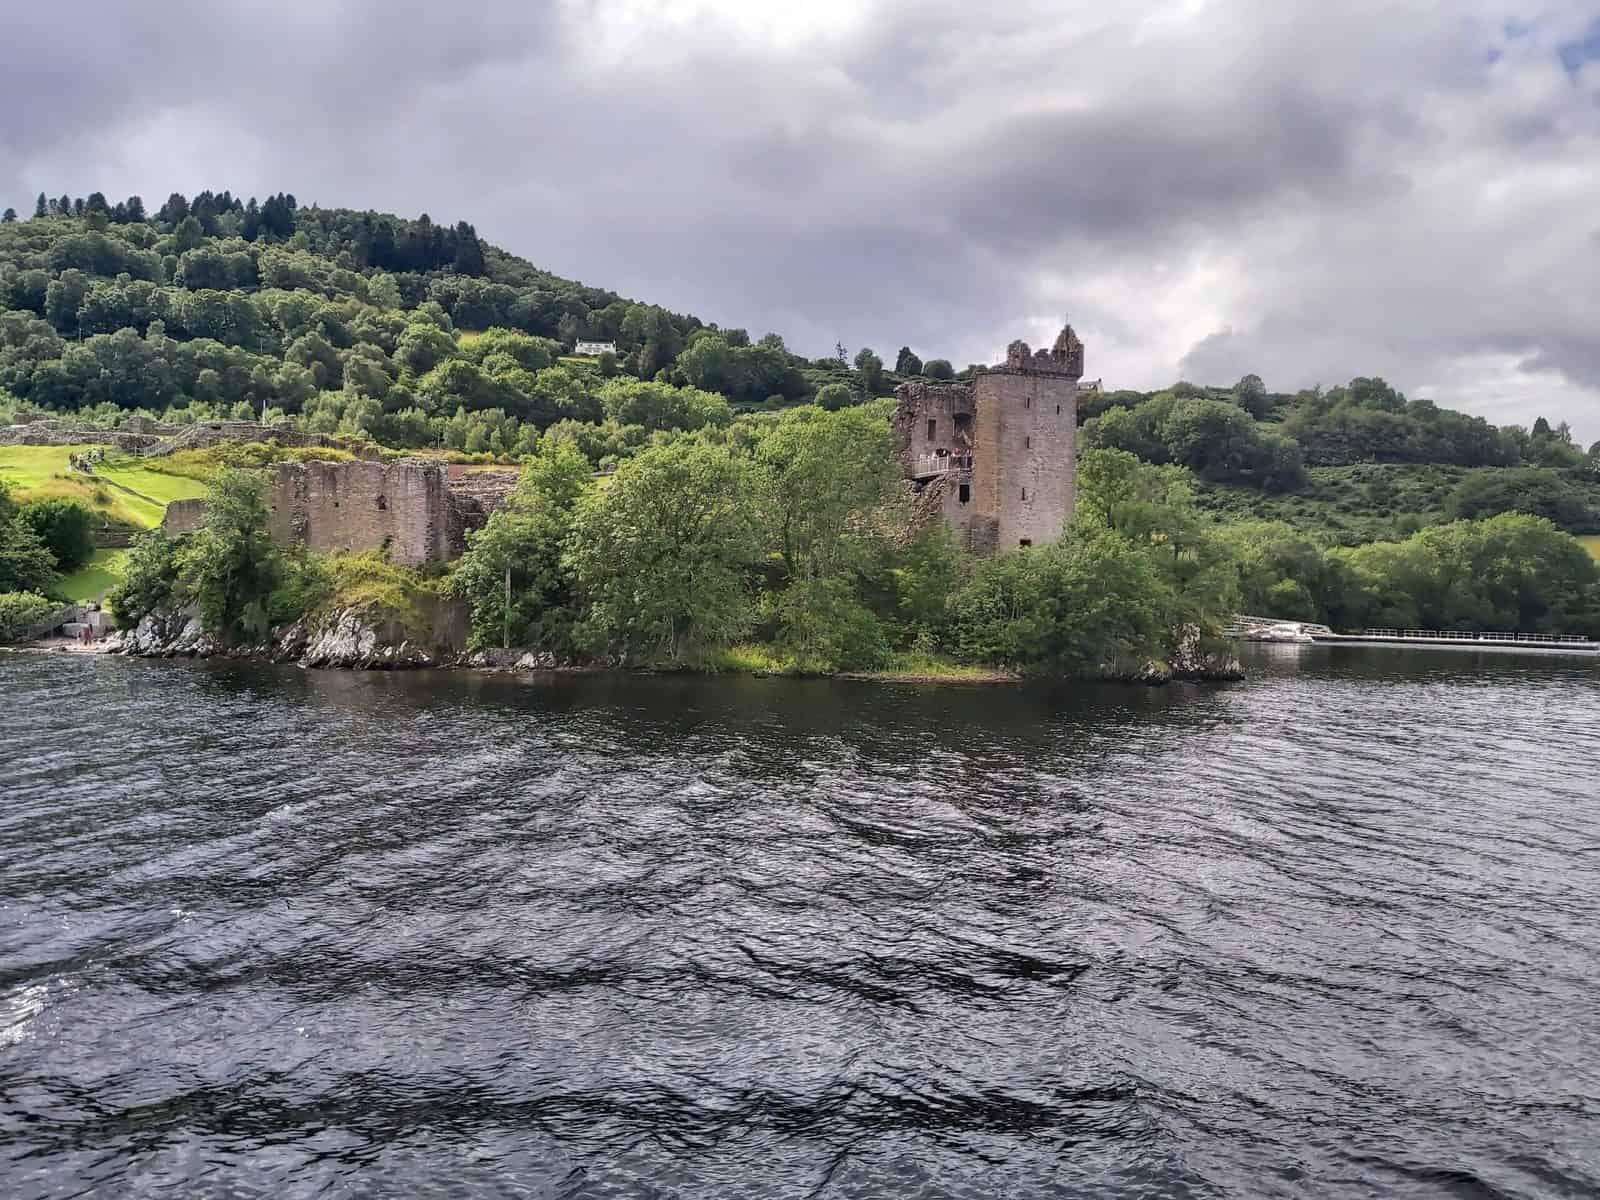 Urquhart Castle on Loch Ness viewed from the water